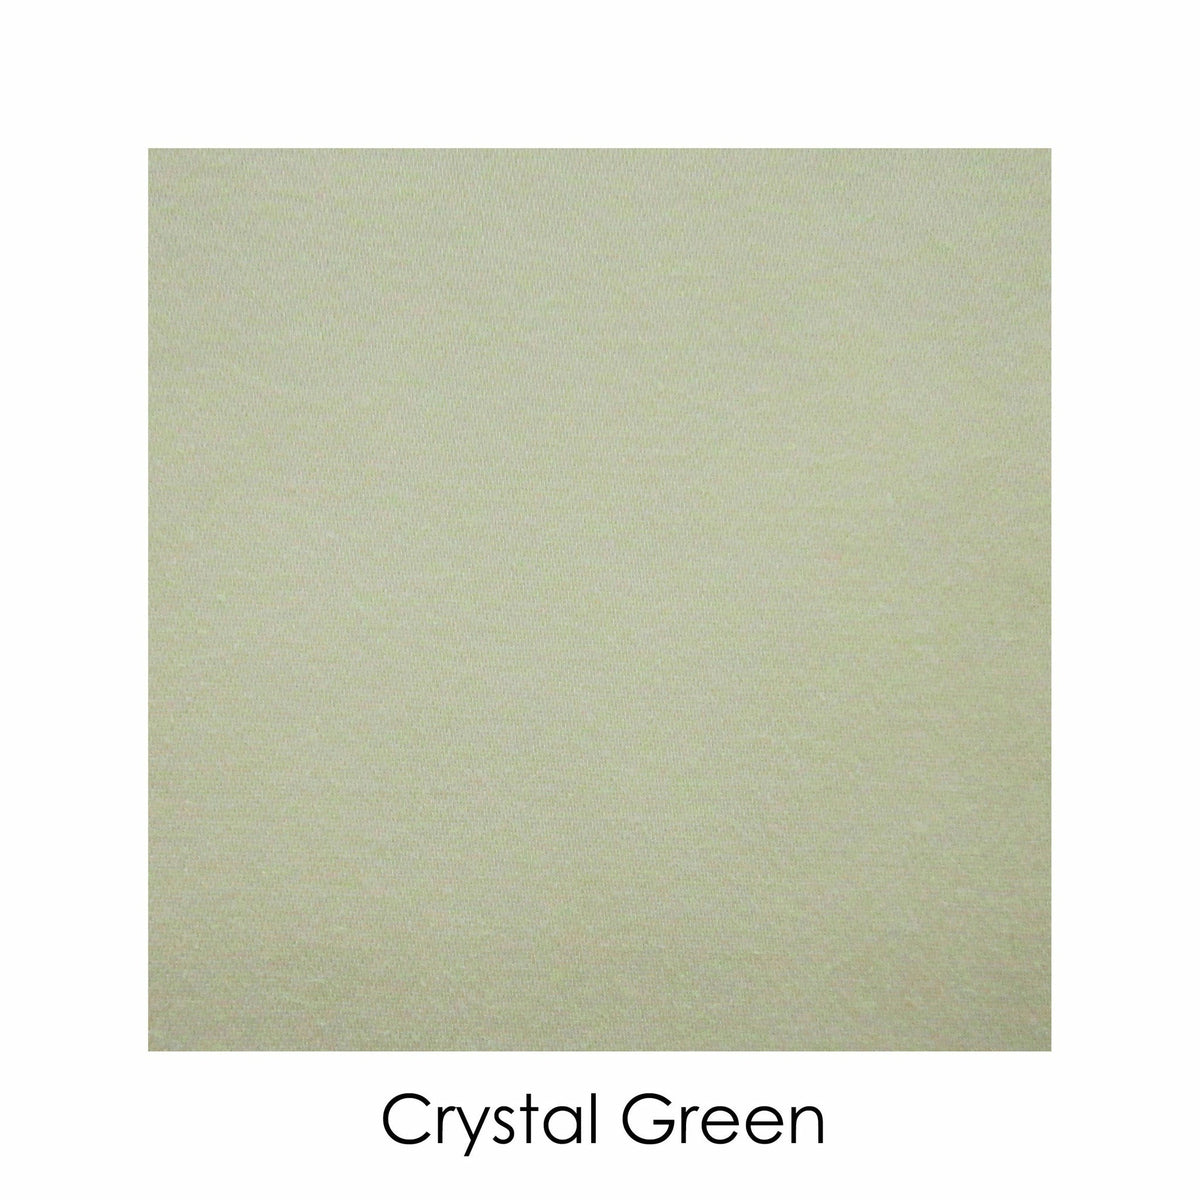 Home Treasures Royal Sateen Color Swatch Crytal Green Fine Linens